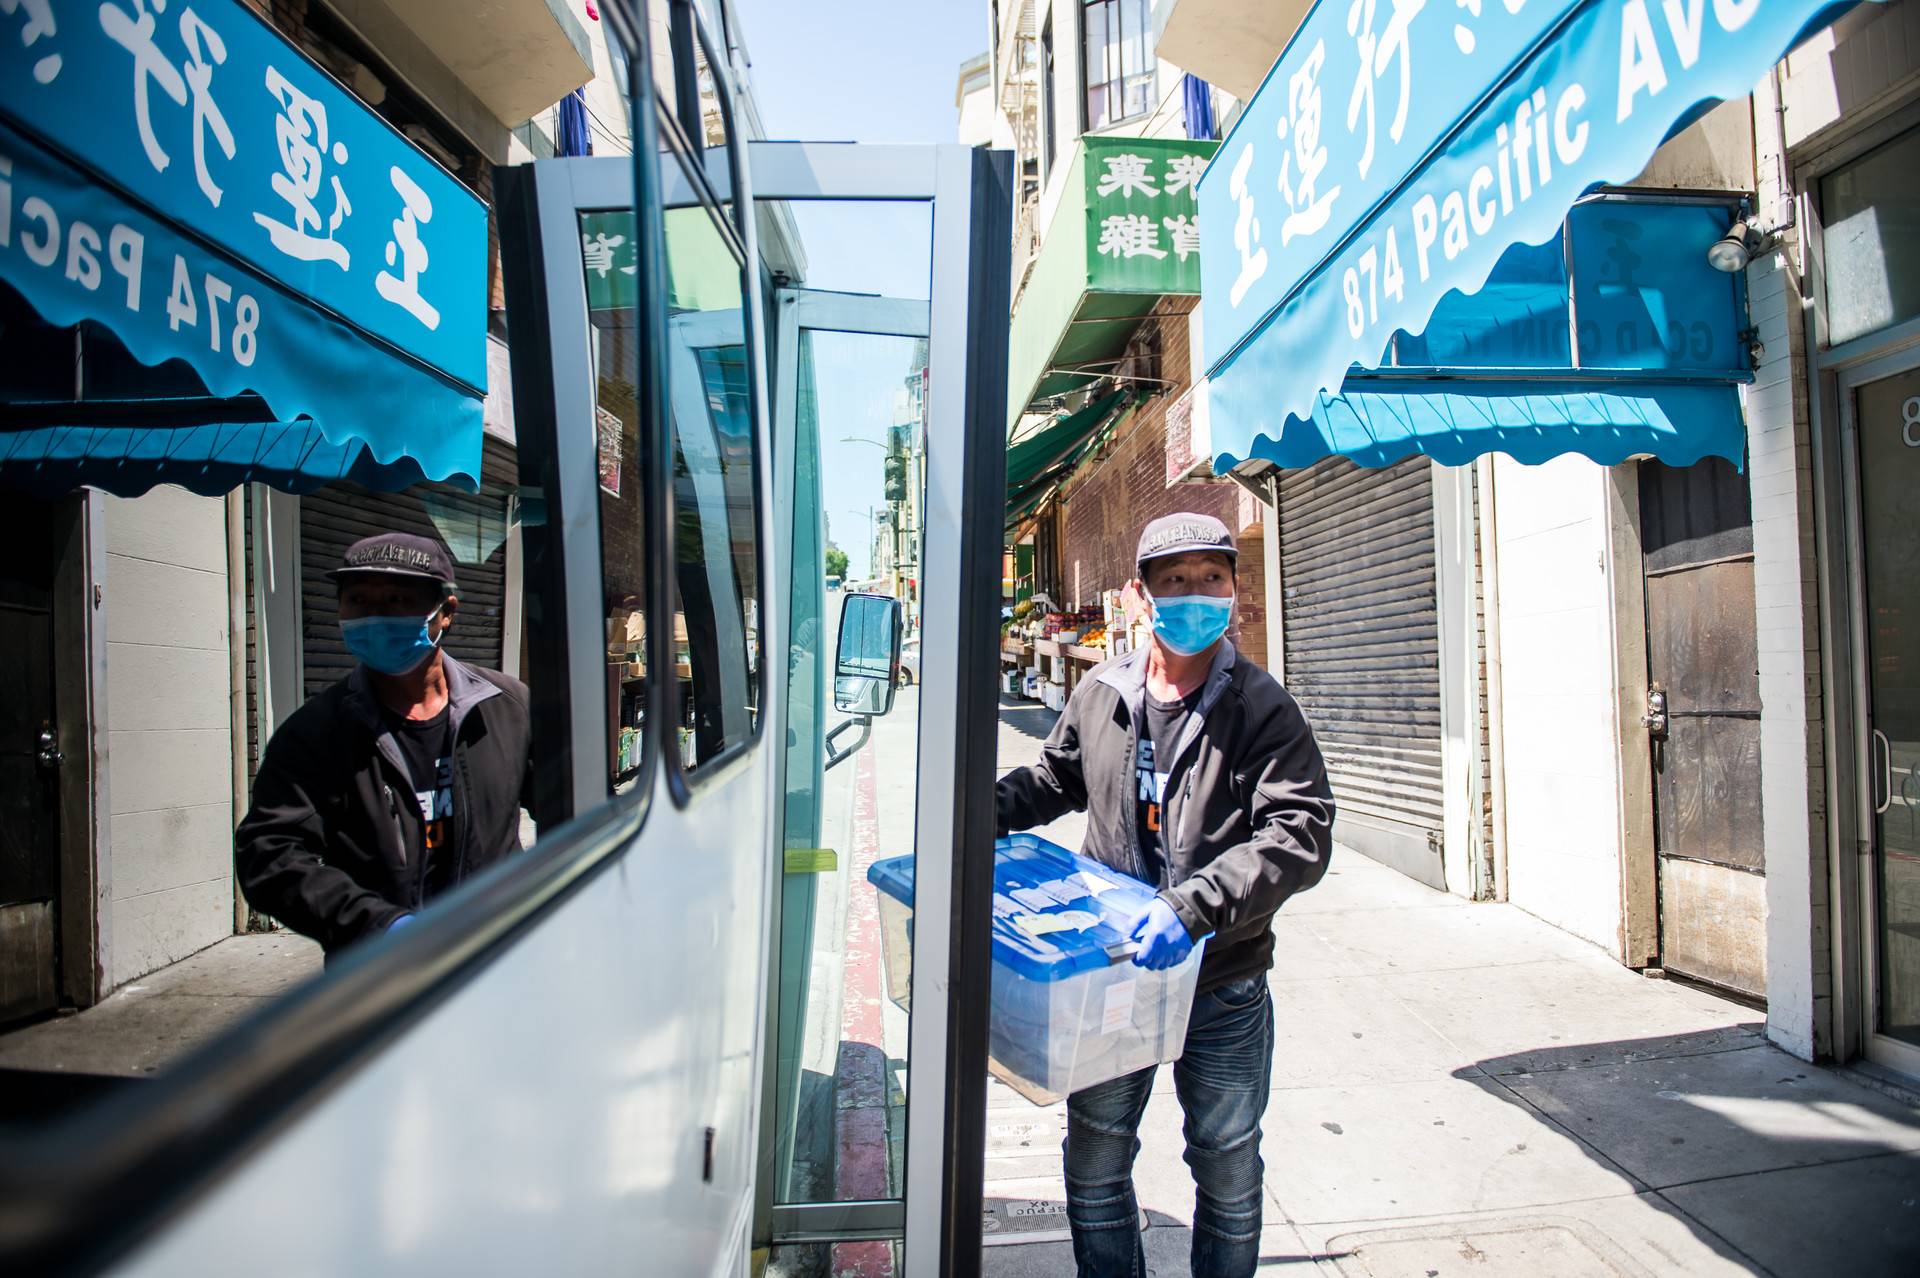 Meals that were prepared at Far East Cafe are brought to Ping Yuen, a public housing building in San Francisco's Chinatown, where employees of a Chinatown nonprofit and volunteers help distribute meals to residents on May 5, 2020. Beth LaBerge/KQED